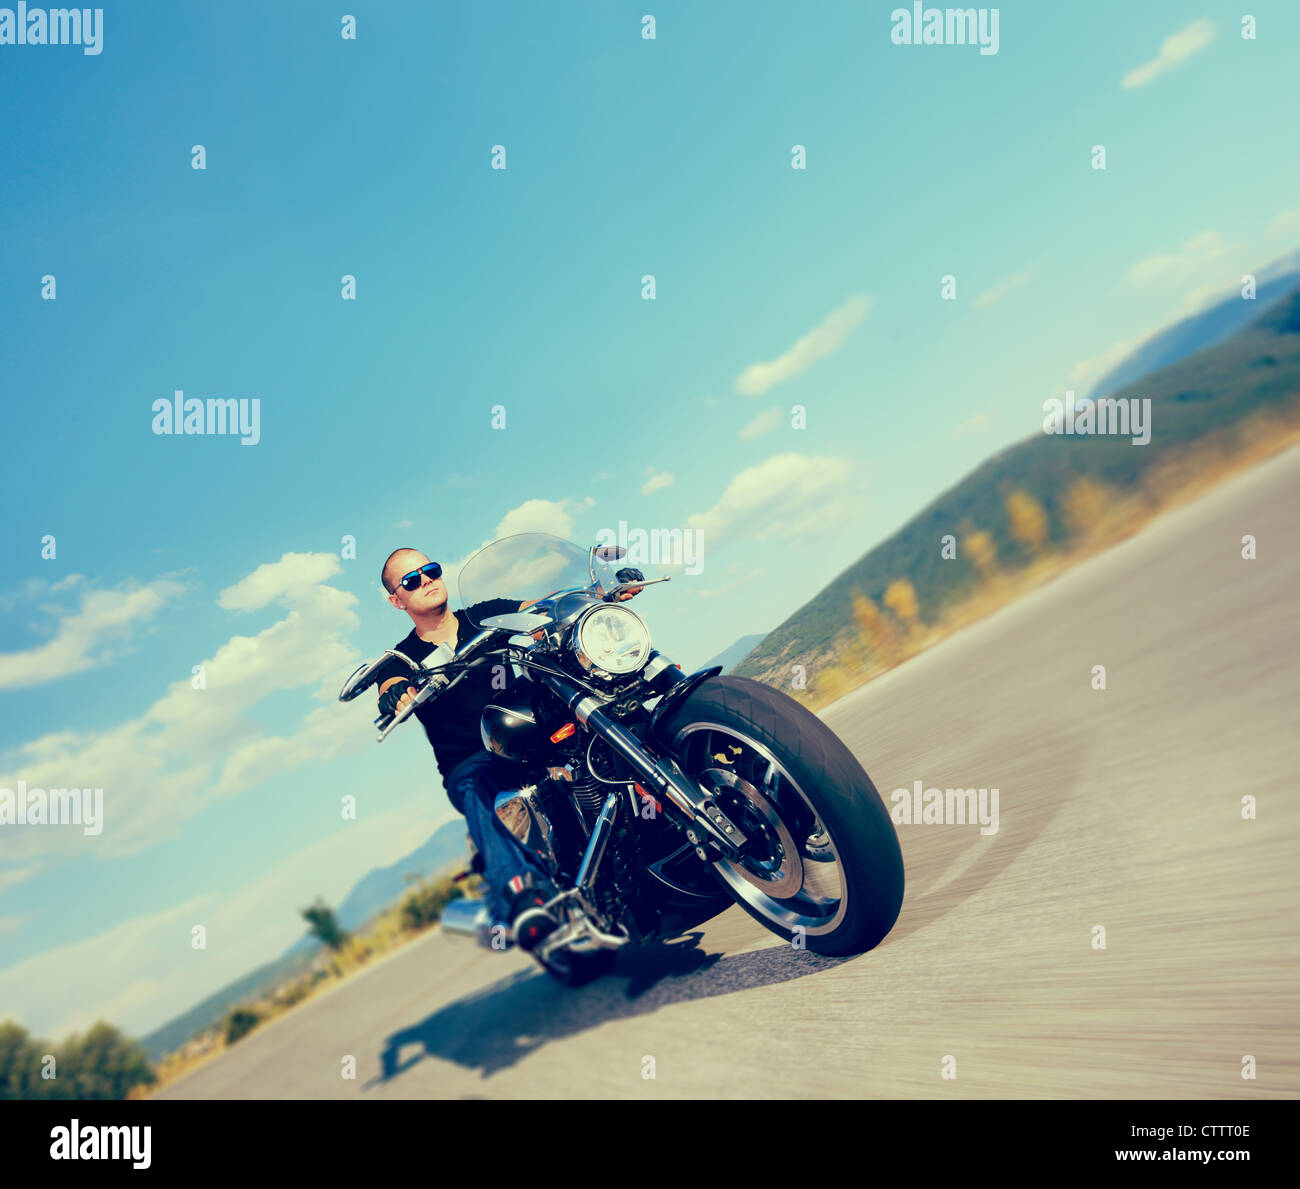 Biker riding a customized motorcycle on an open road shot with a tilt and shift lens and with very shallow depth of field Stock Photo